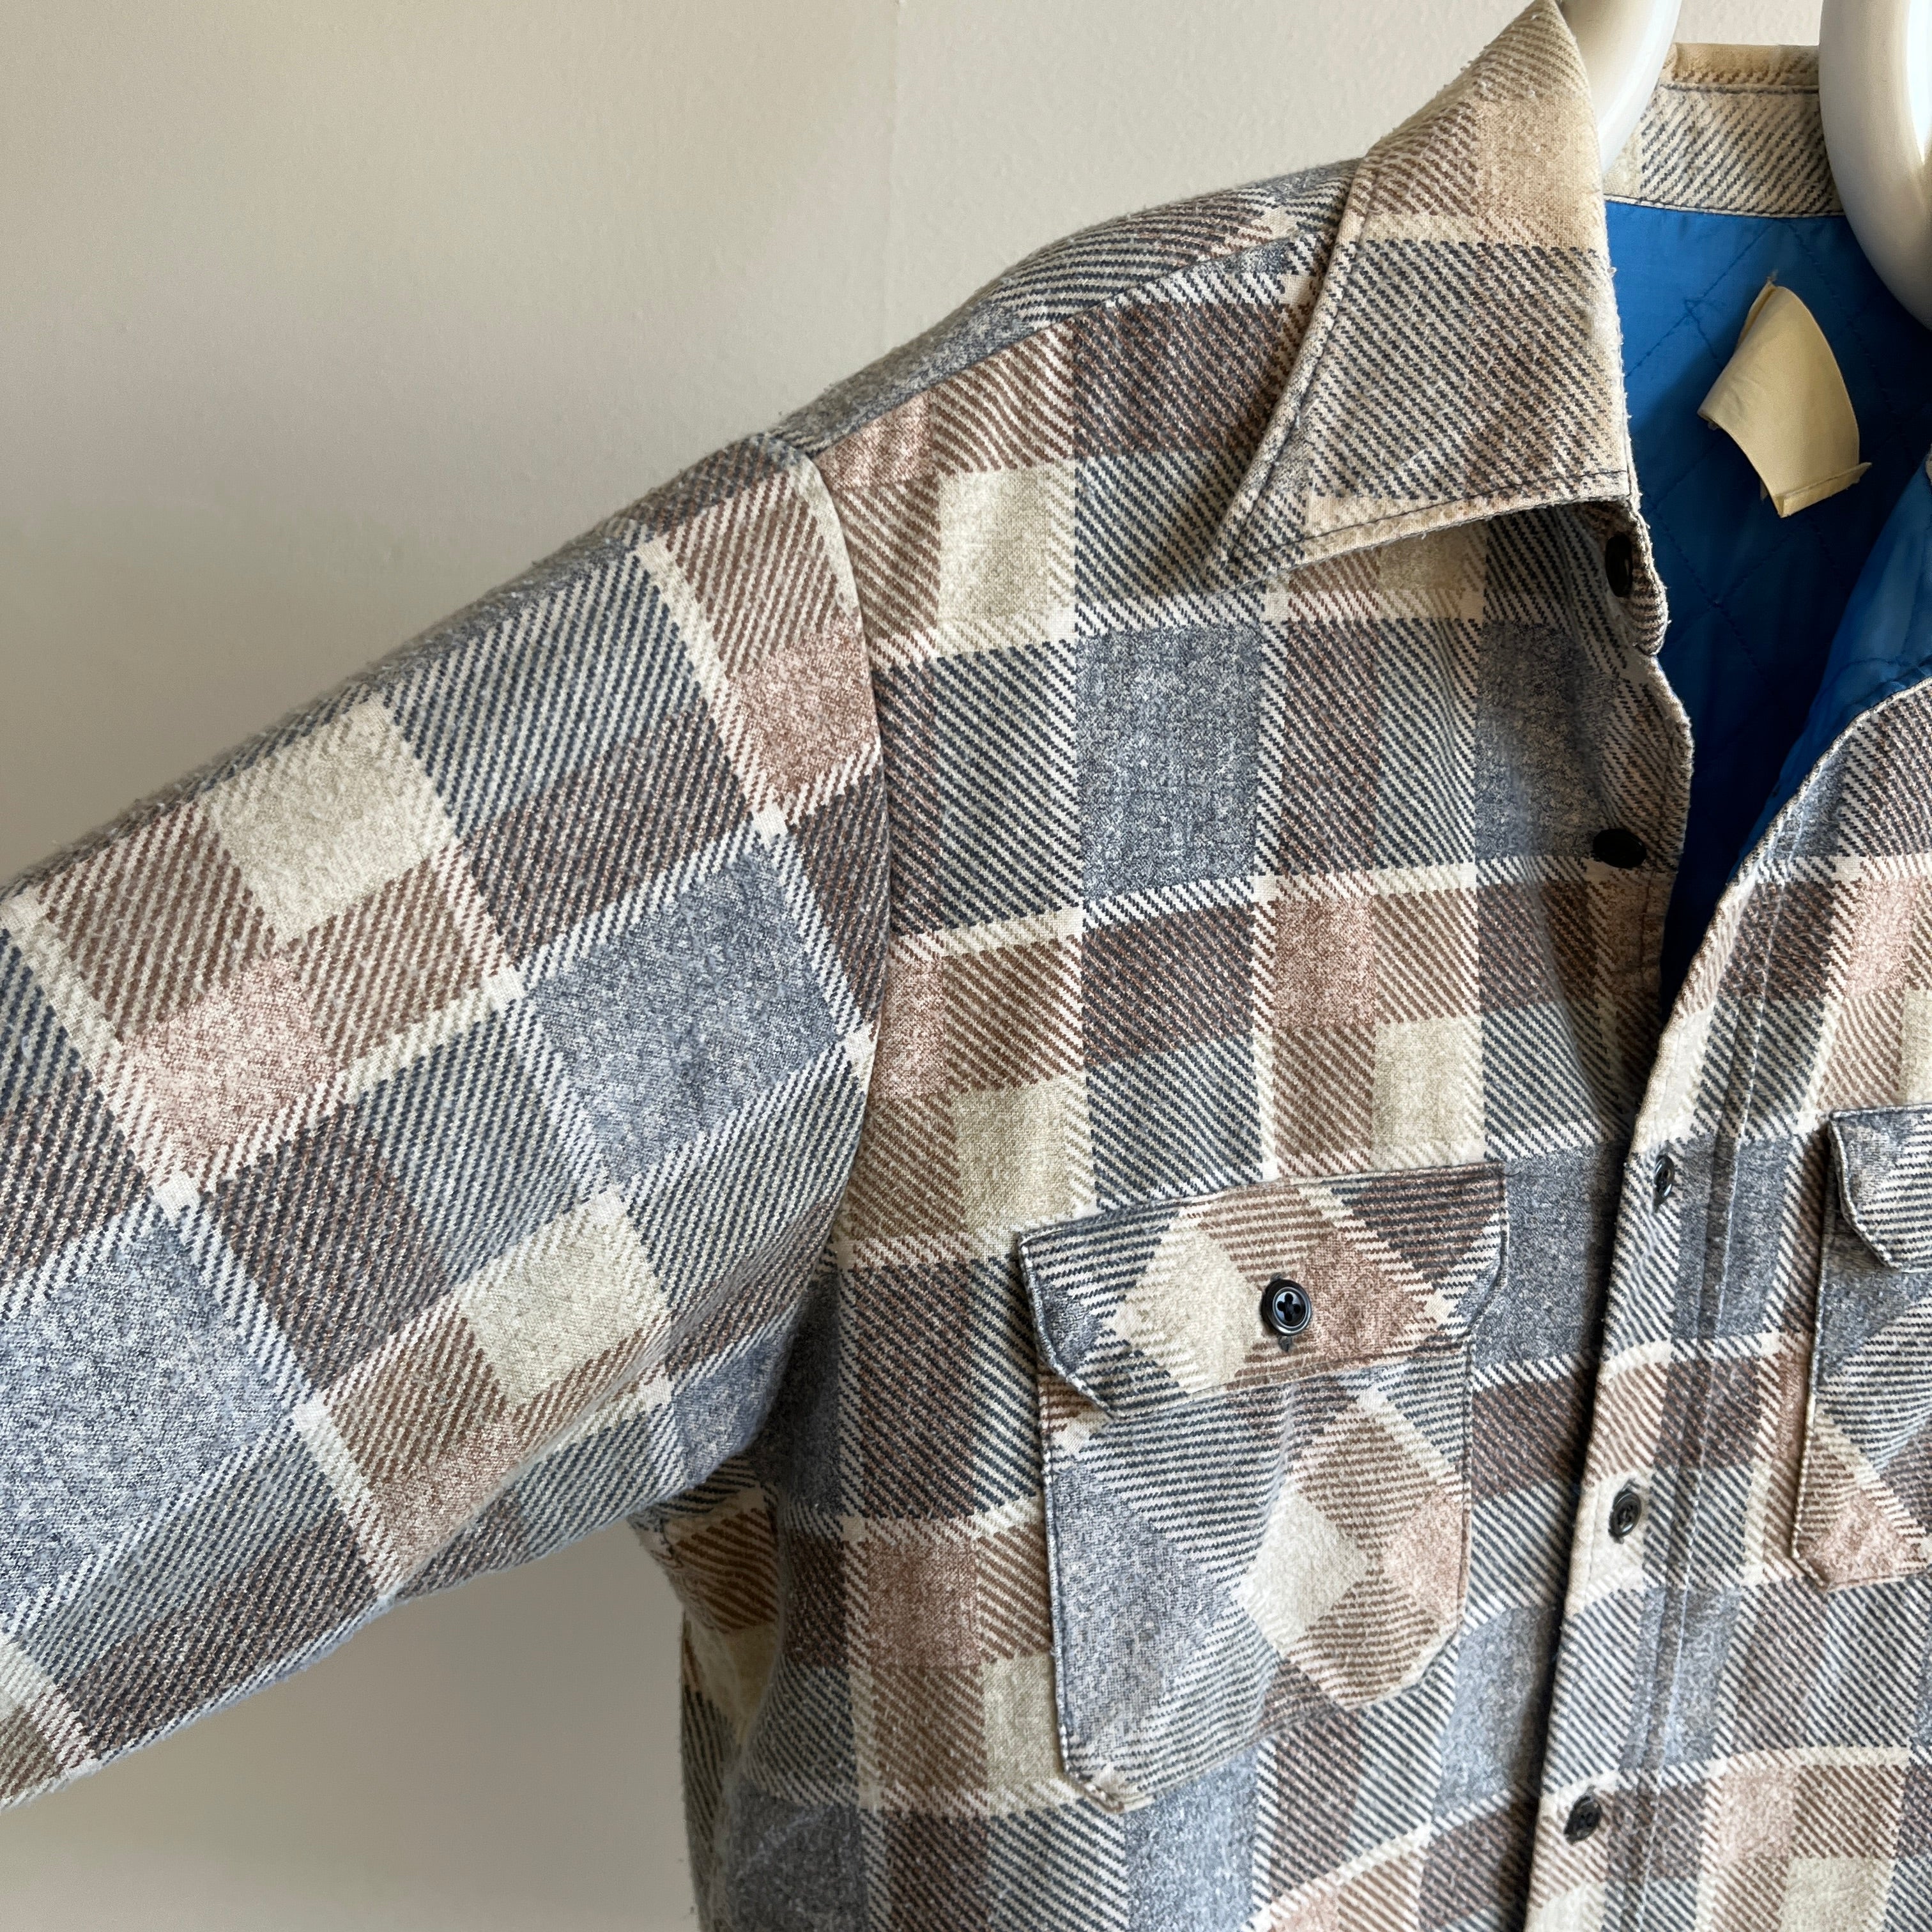 1970s Insulated Flannel Jacket - Light in Weight, But Warm